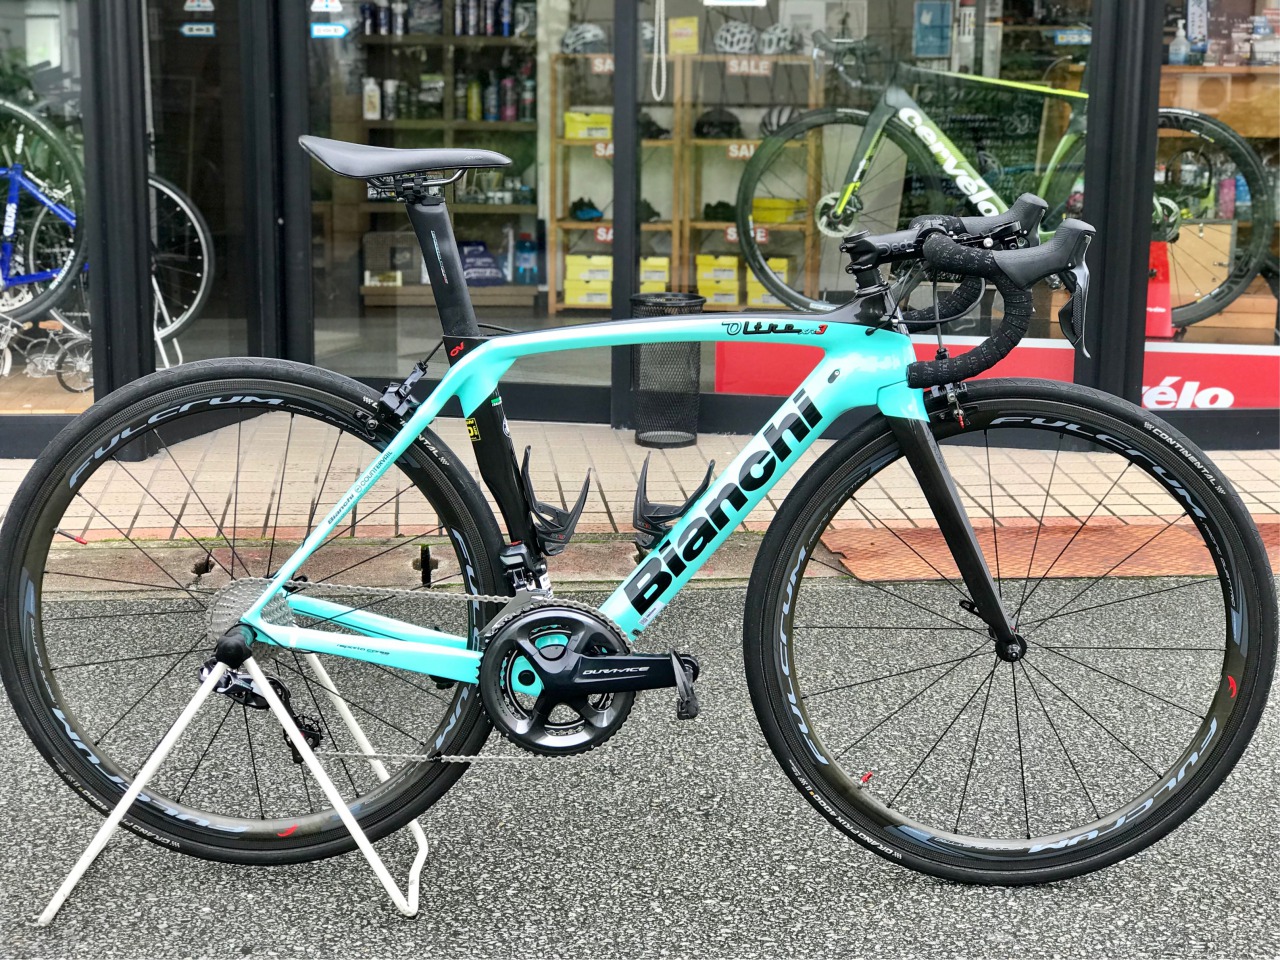 Bianchi Oltre XR3納車しました！From Sさま - Climb cycle sports